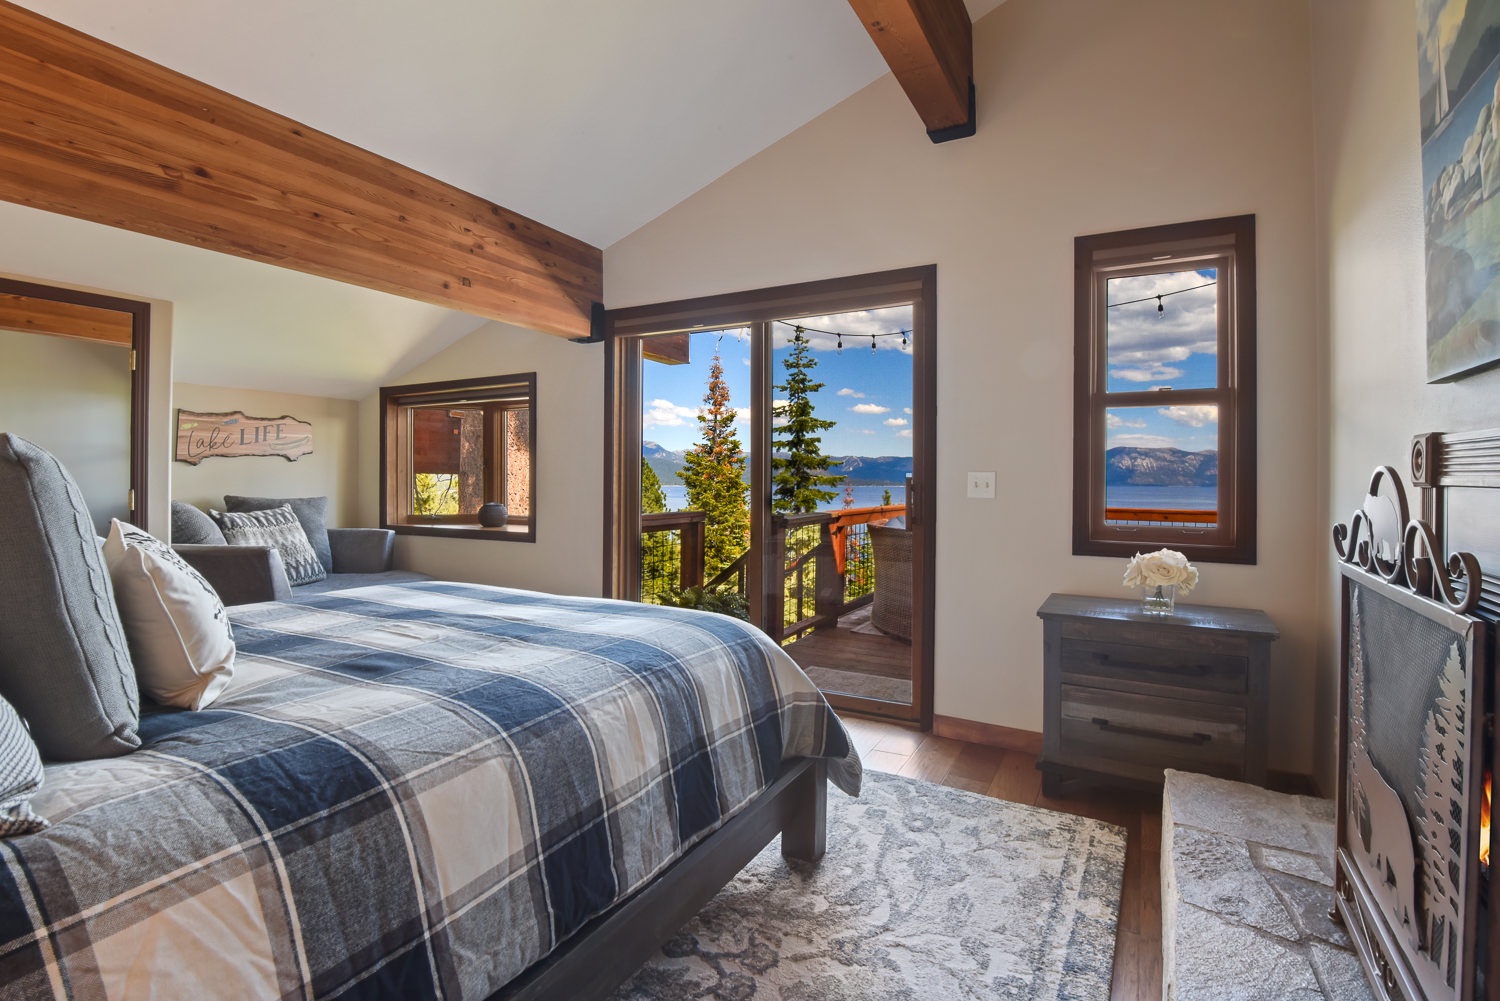 Master bedroom: Queen bed with fireplace and balcony access